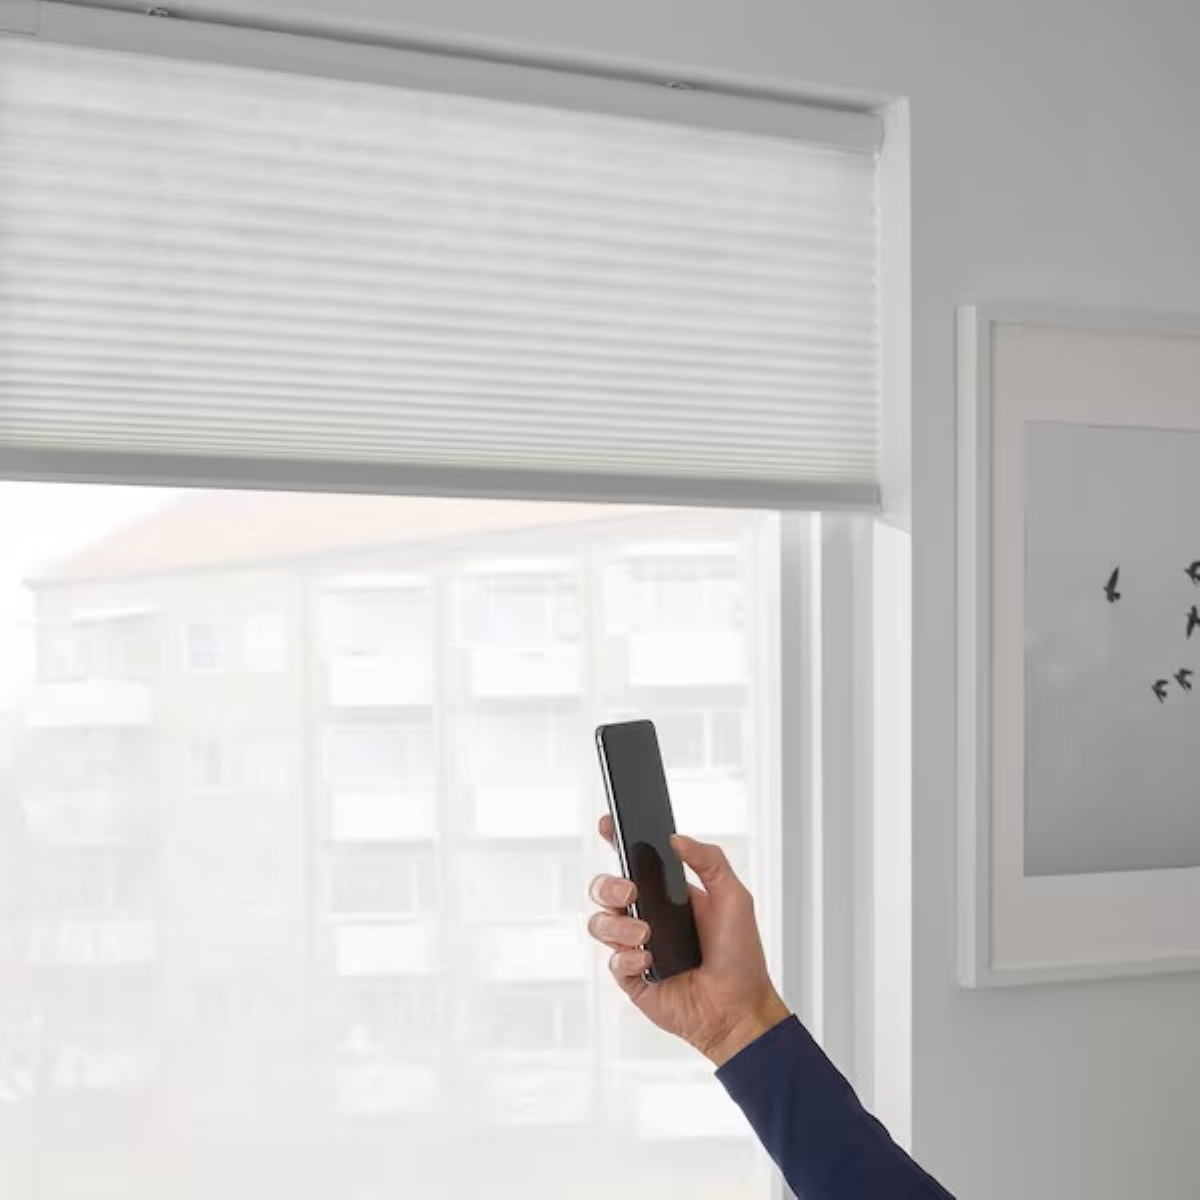 Person using remote for window covering.